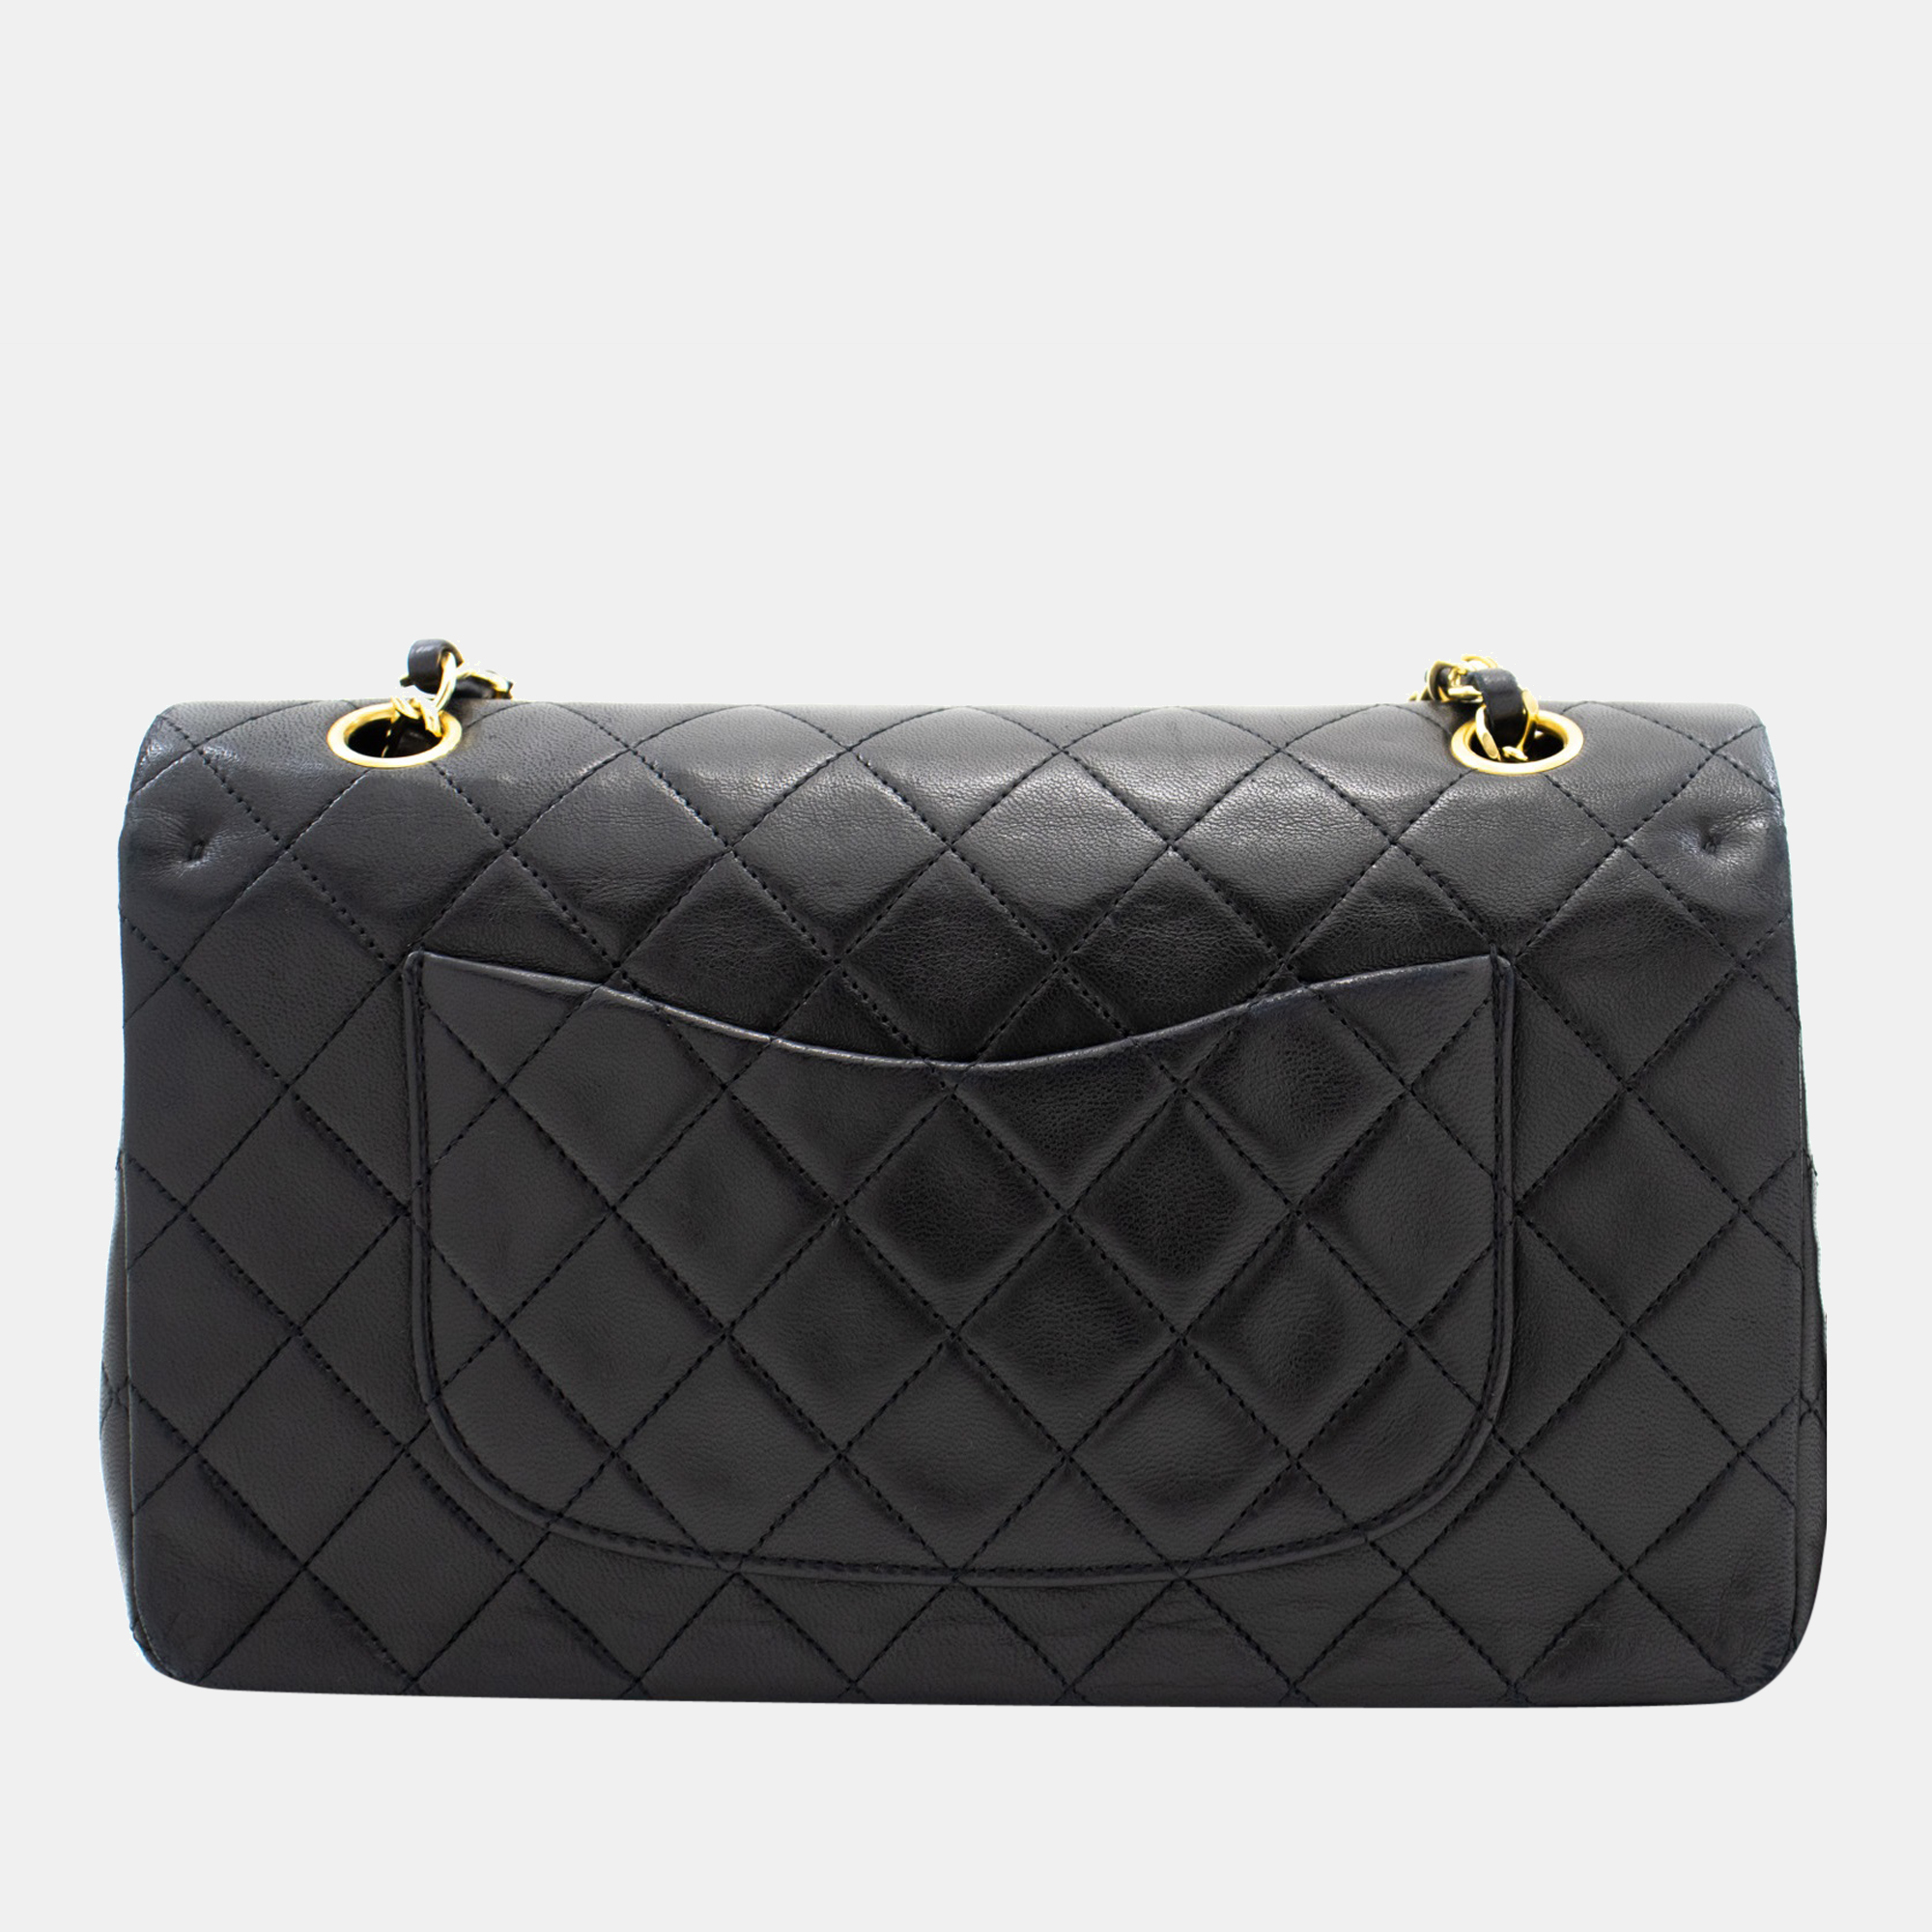 Chanel Black Leather Classic Double Flap Bag